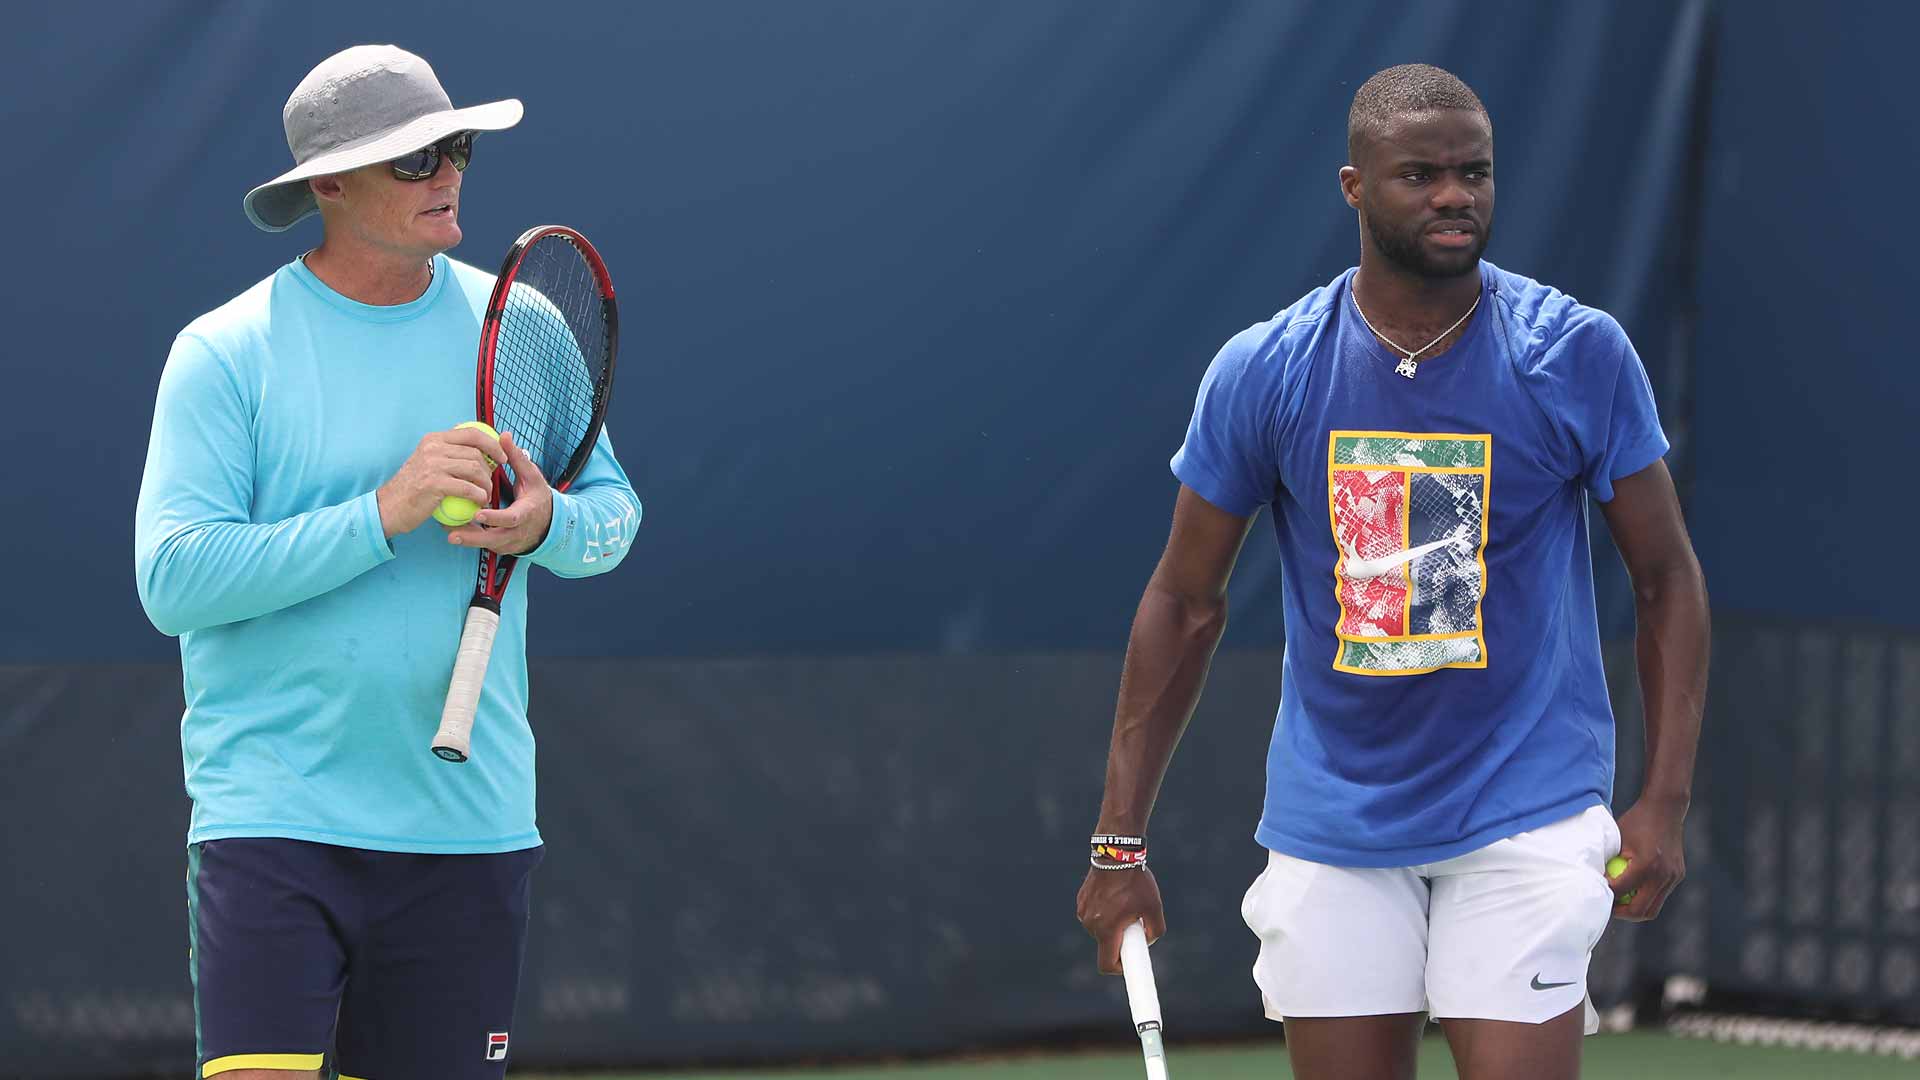 Wayne Ferreira and Frances Tiafoe worked together for the past three years.